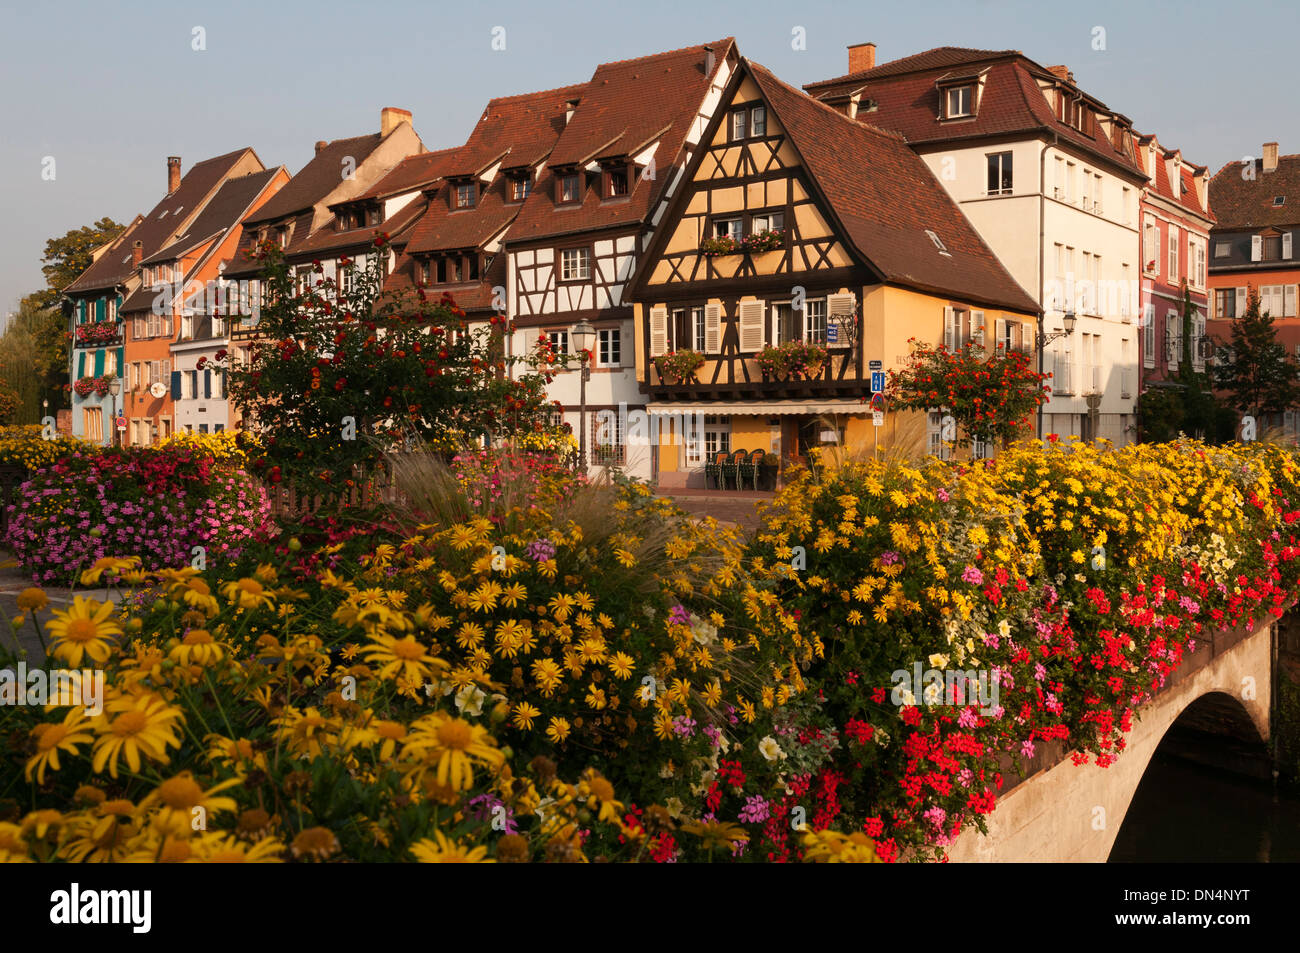 Elk213-2734 France, Alsace, Colmar, Petit Venise with half-timbered houses Stock Photo